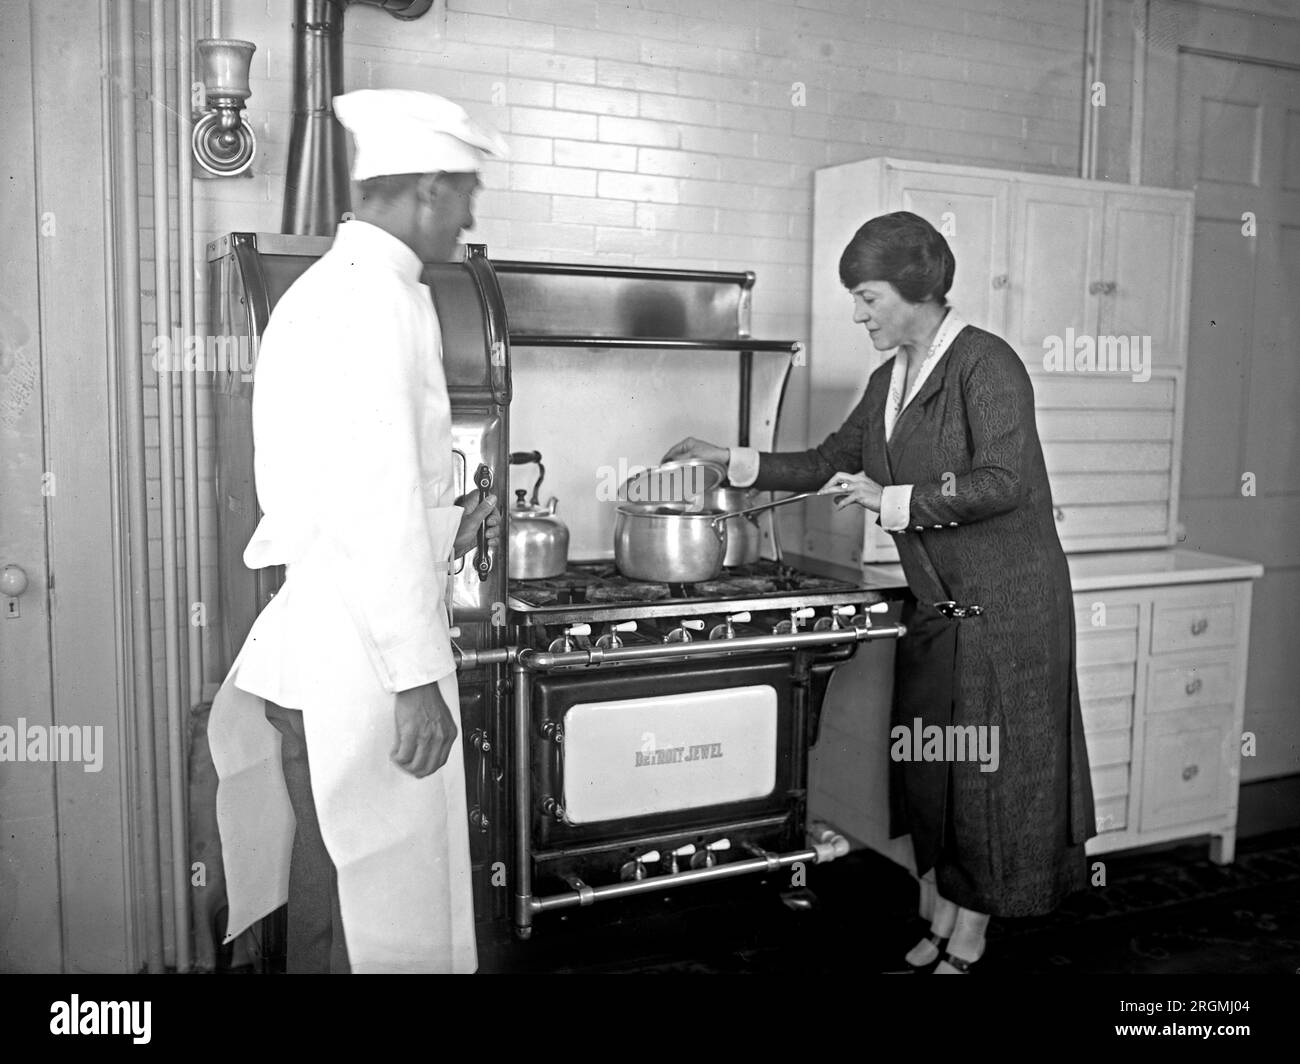 Mary Roberts Rinehart looking at a pot on a stove in a kitchen, and a chef ca. 1926 Stock Photo